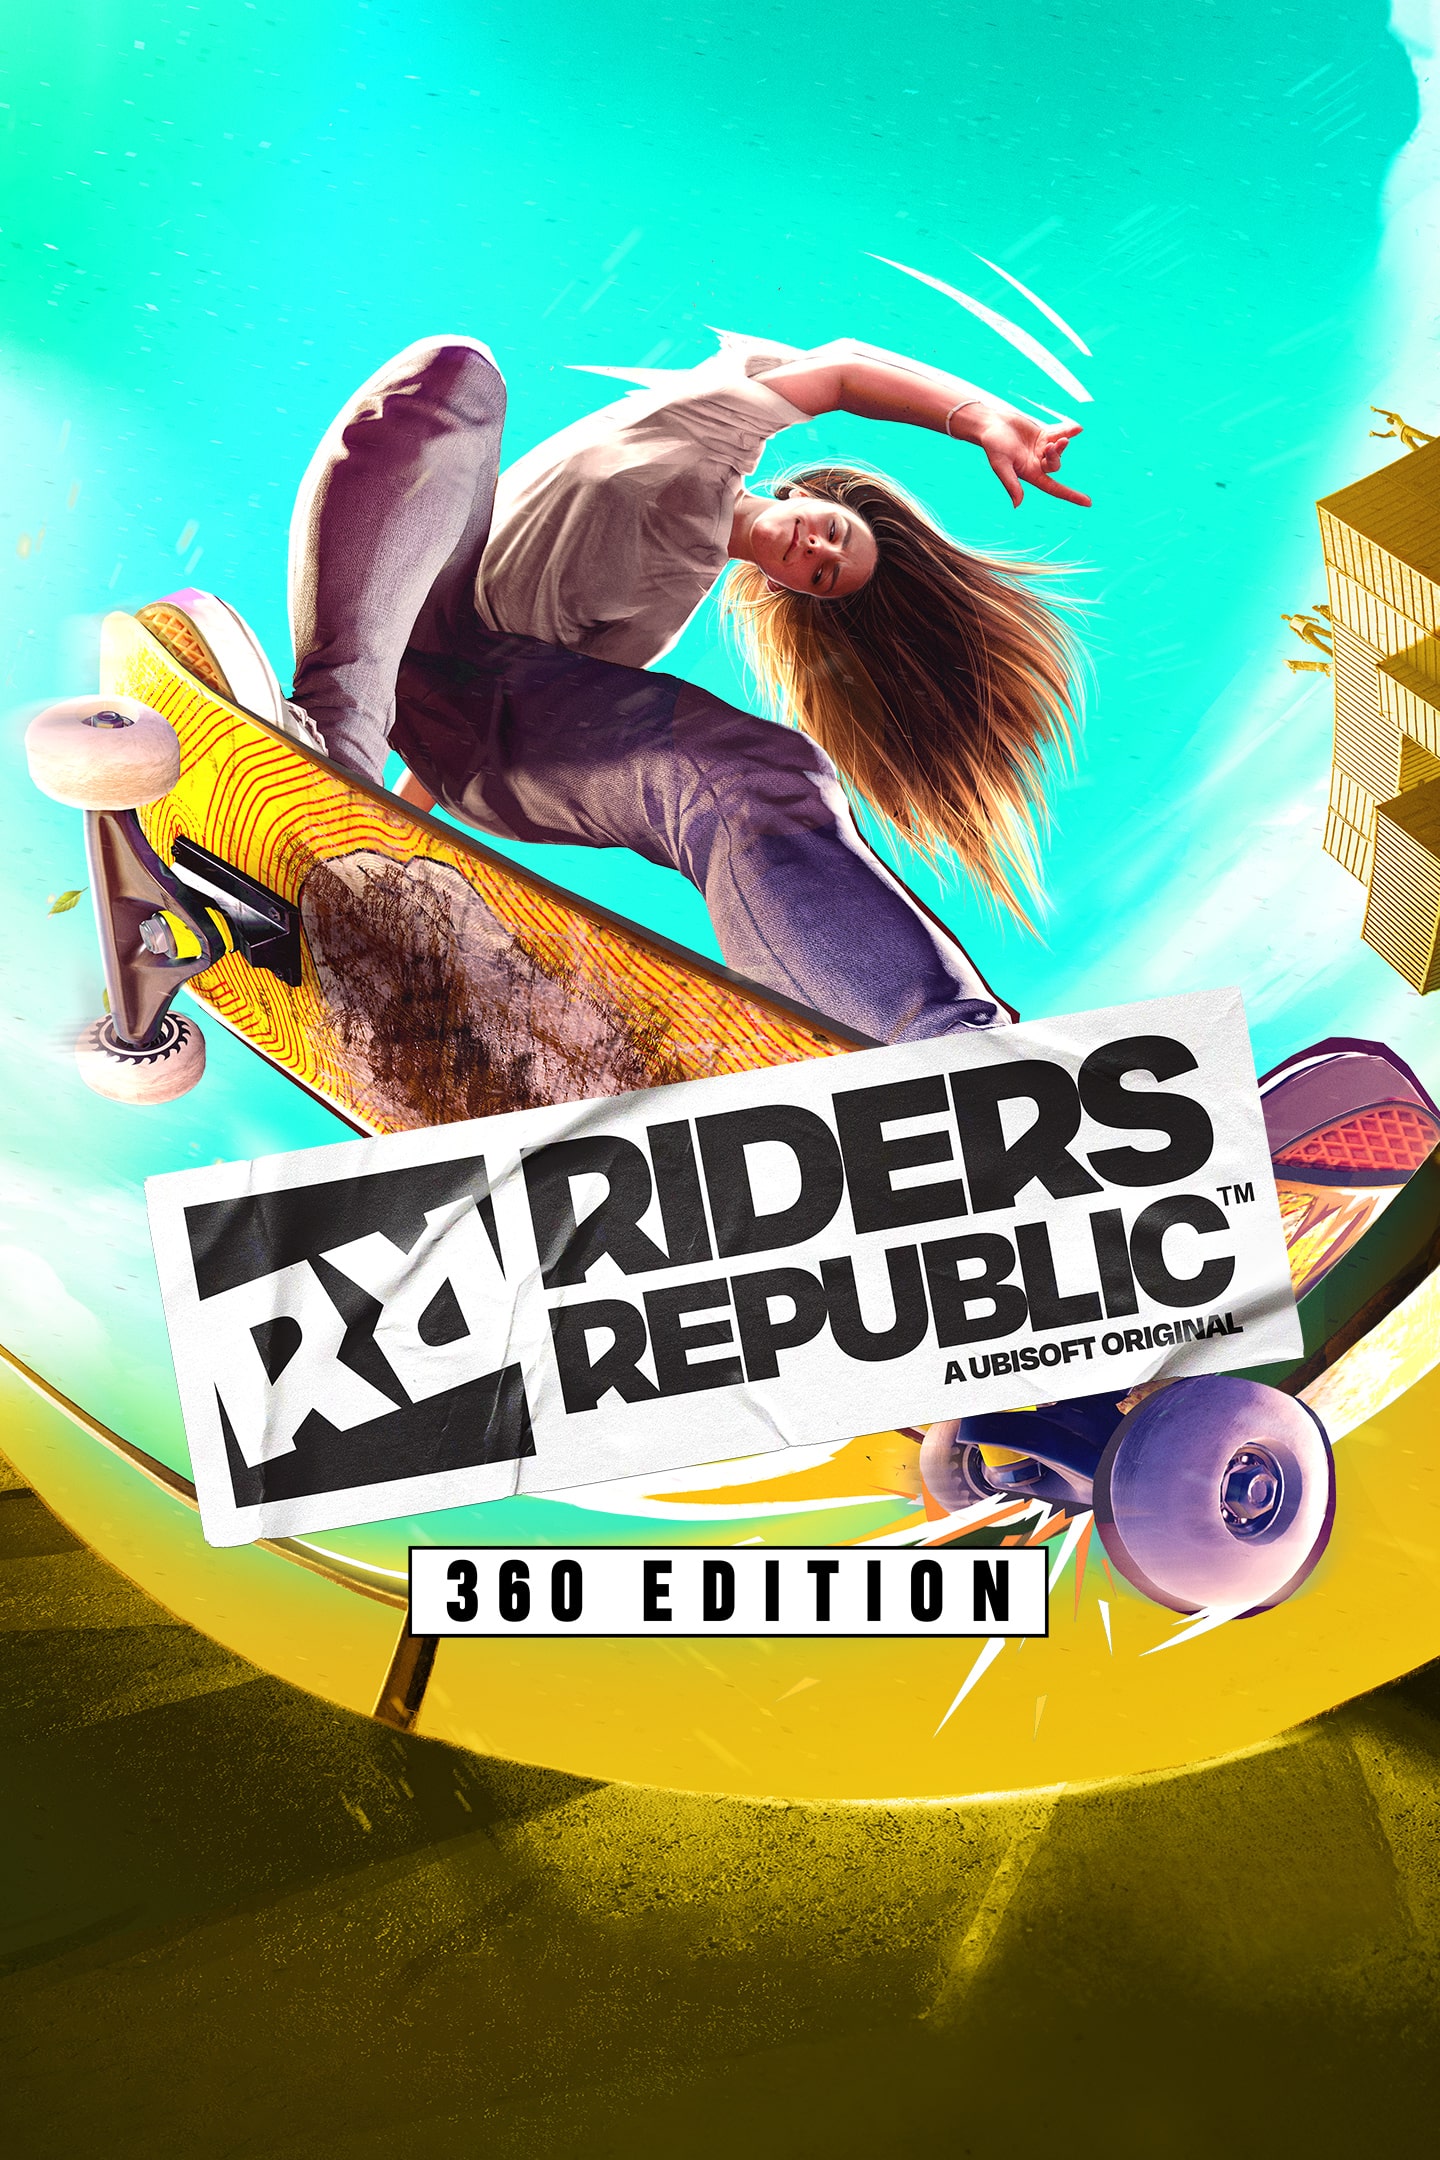 Rider's Republic skateboarding add-on looks like the perfect way